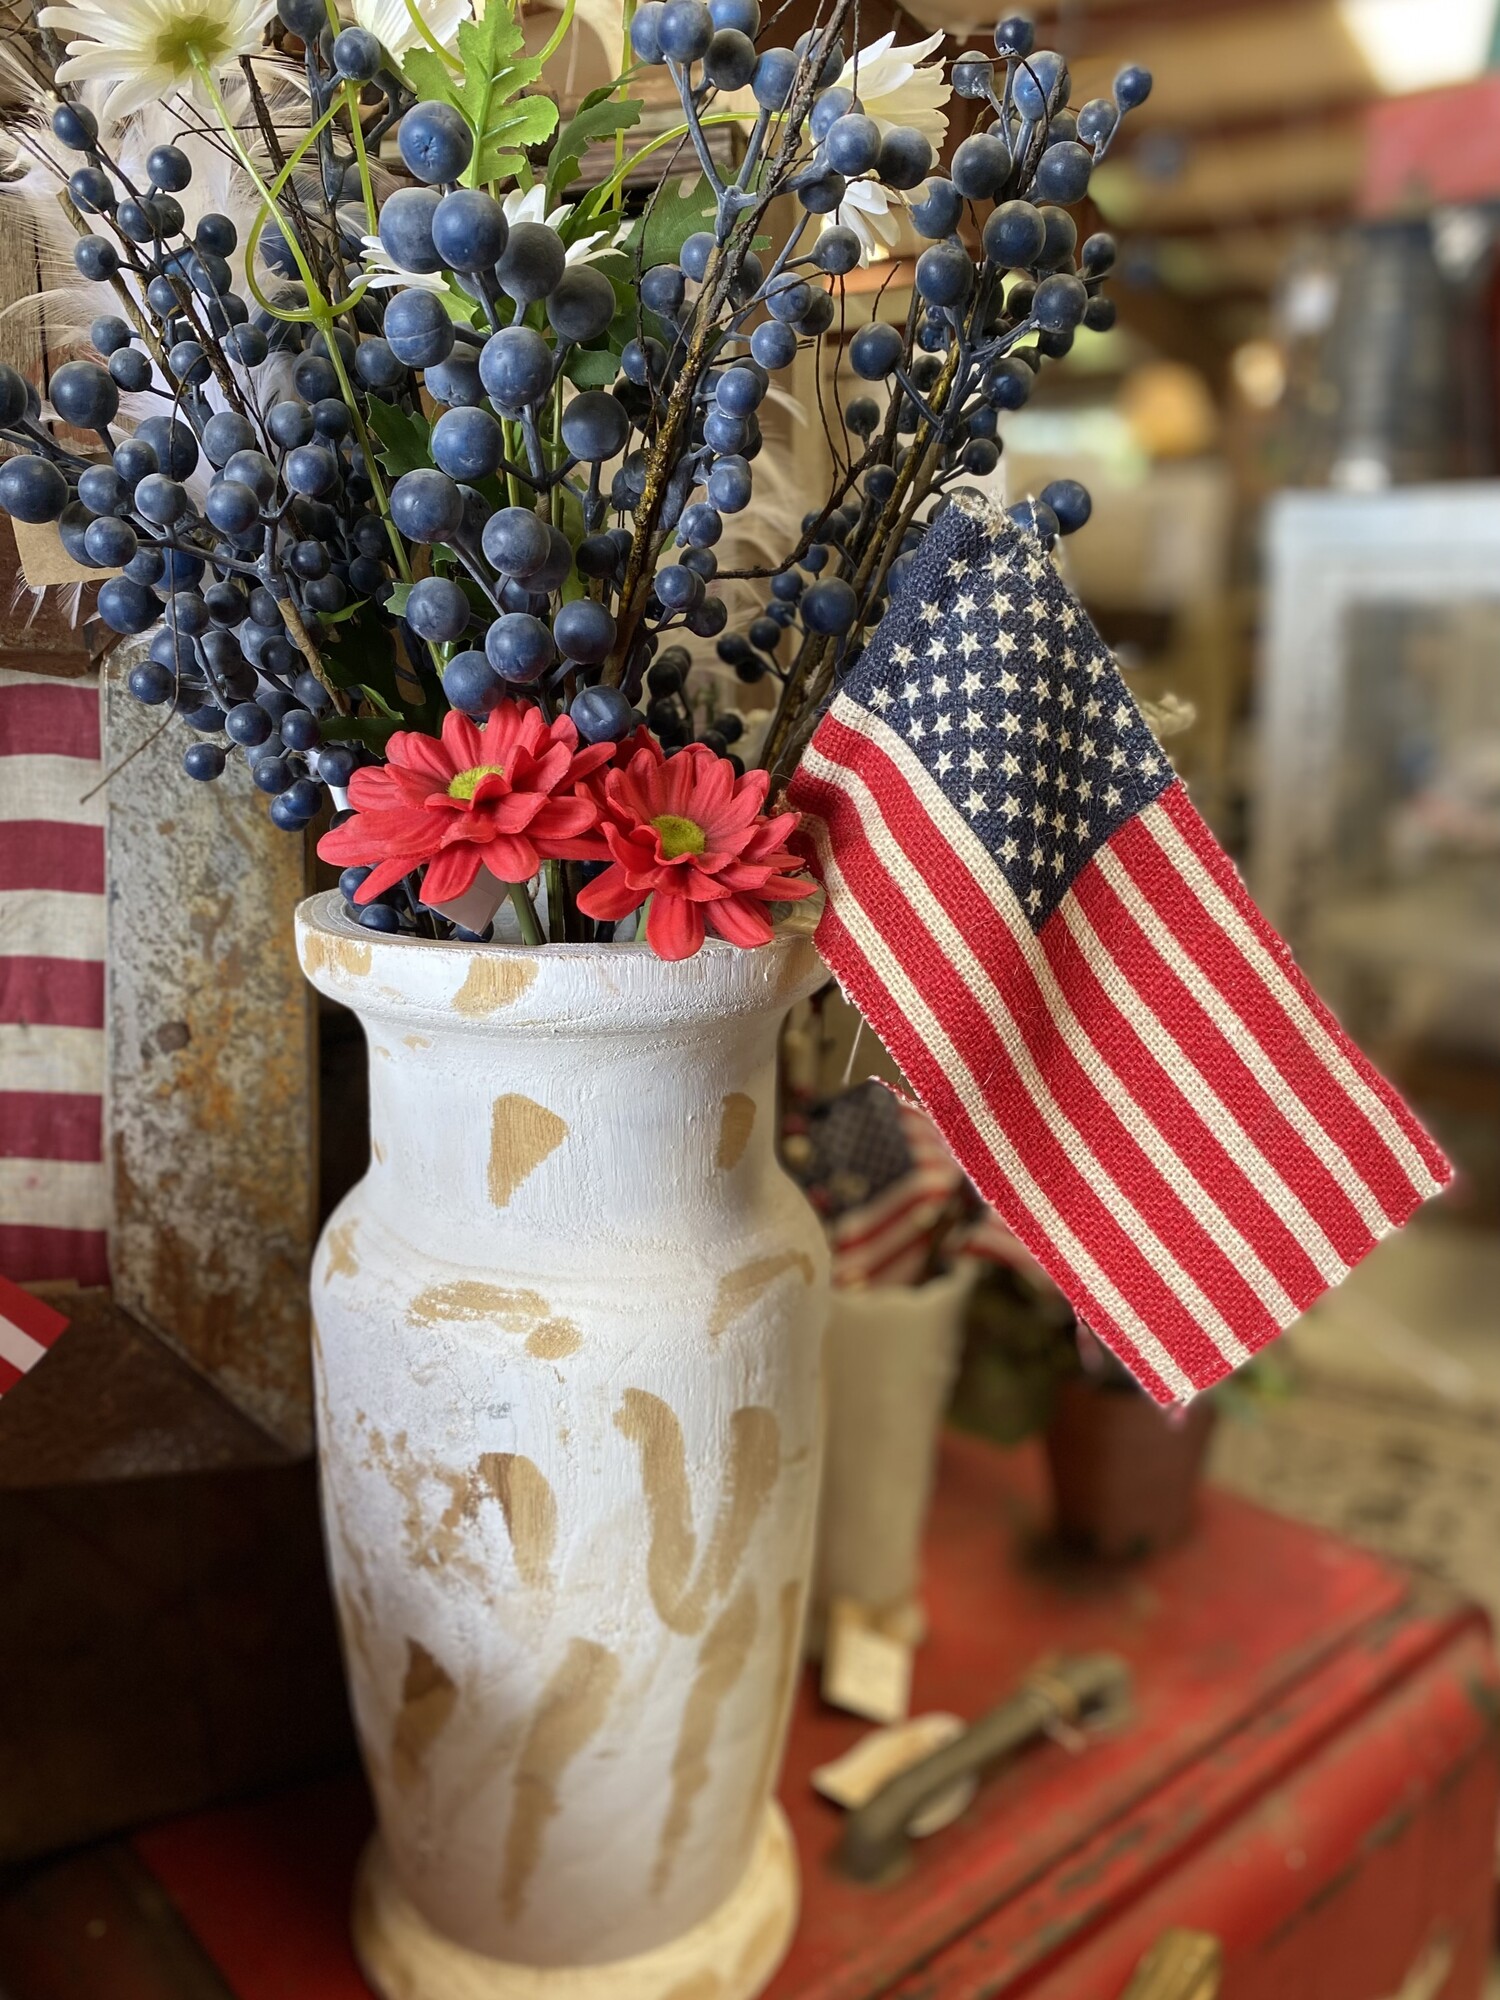 Show your pride with this burlap and branch flag
The stick is 14 inches tall and the flag measrues 9 and a half inches in length and 5 inches tall
Place this flag in vases with patriotic flowers, in a jar, bottle or just about anywhere you want to show your pride